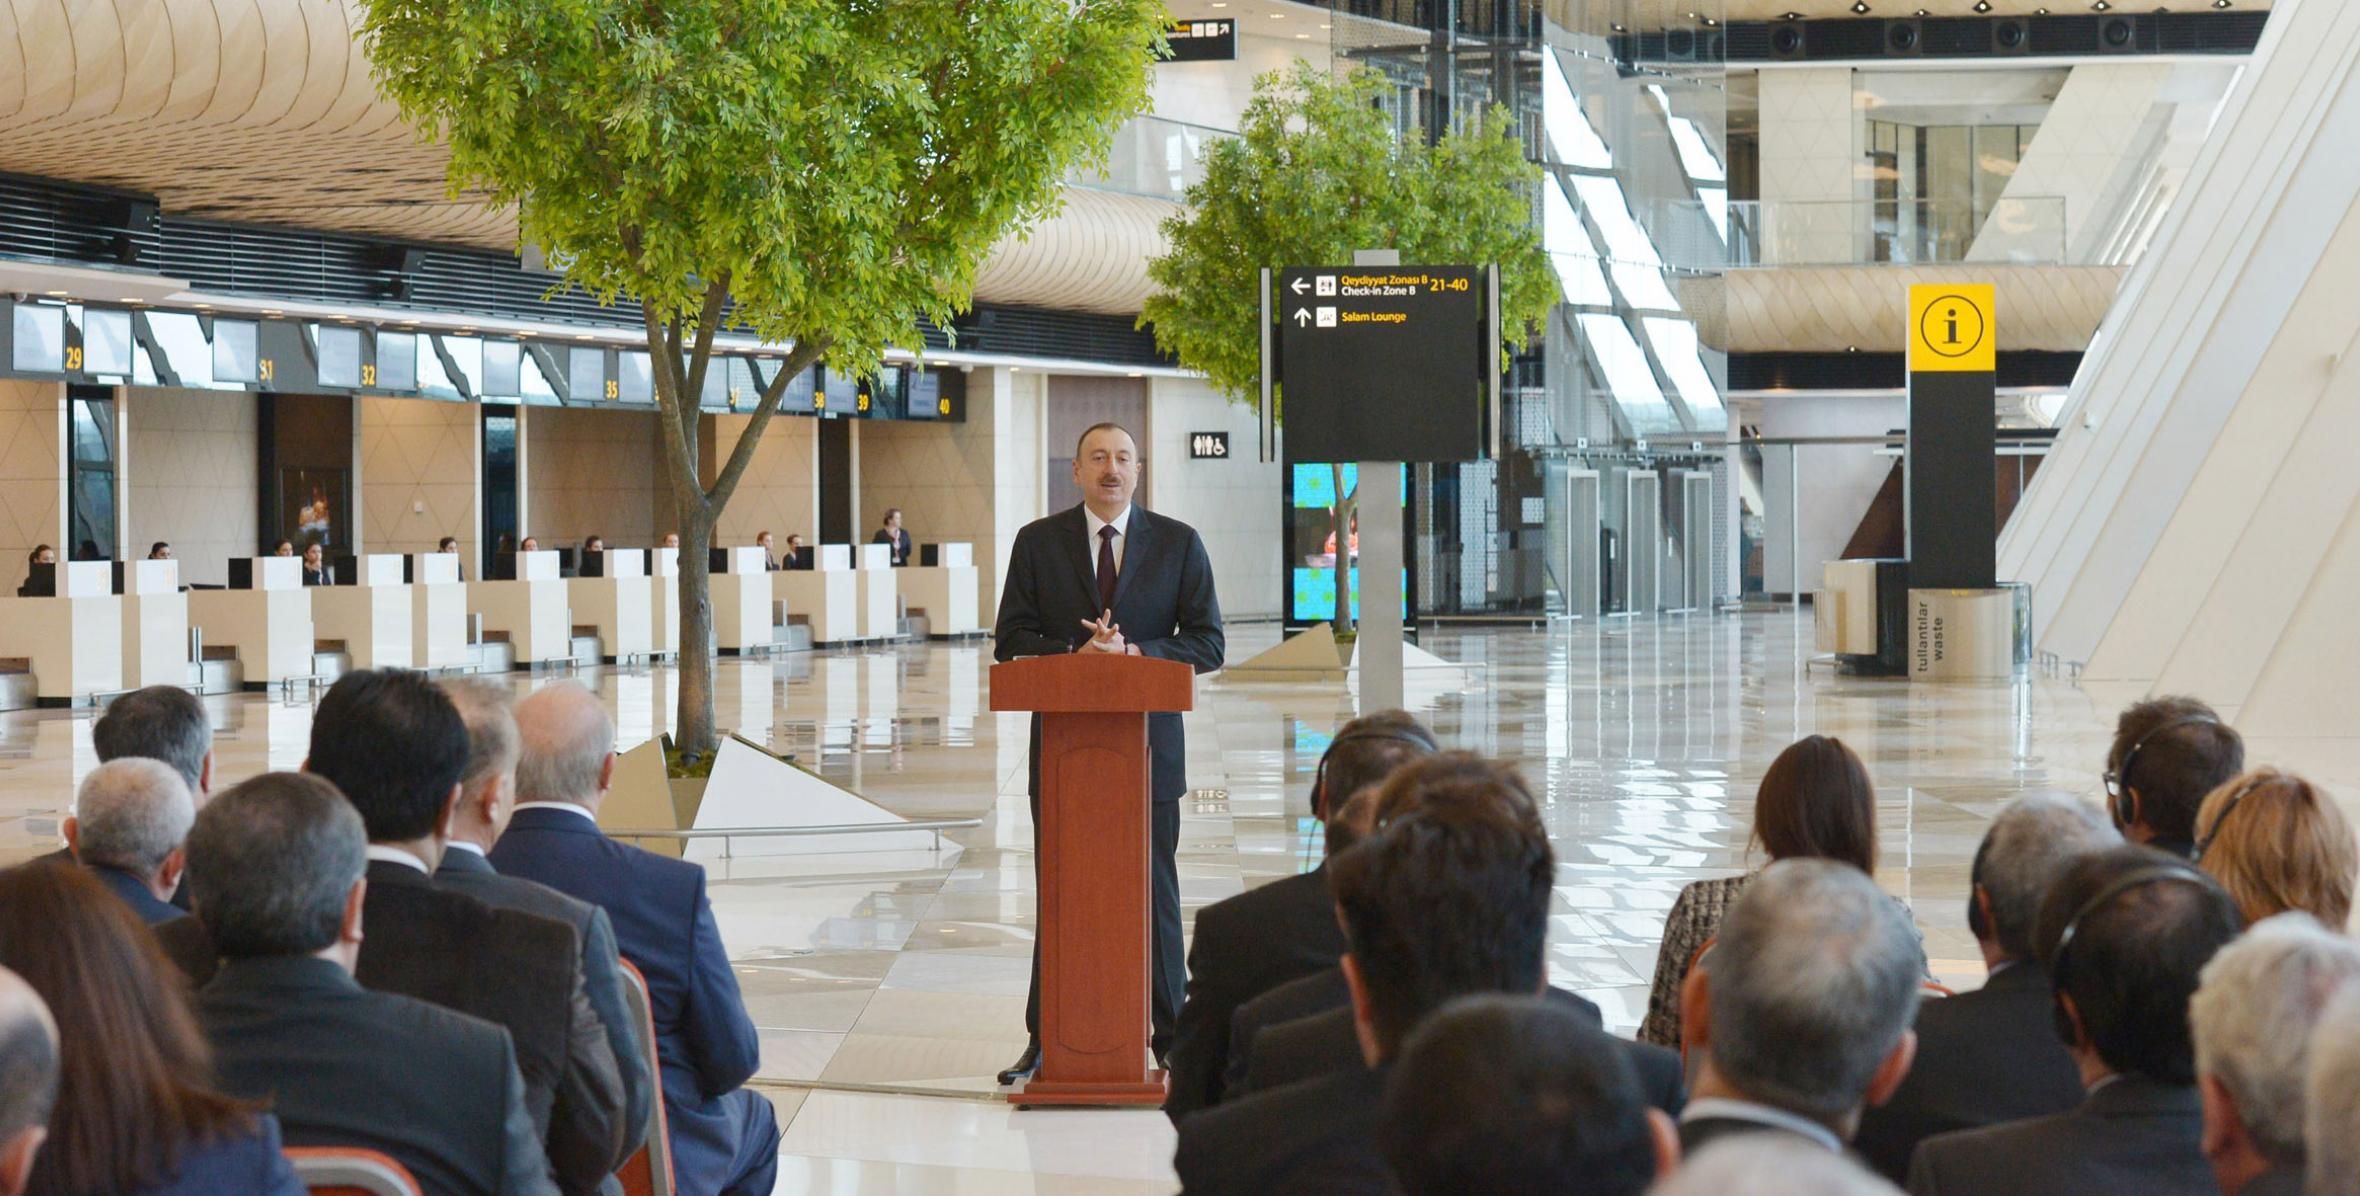 Speech by Ilham Aliyev at the opening ceremony of a new terminal of the Heydar Aliyev International Airport